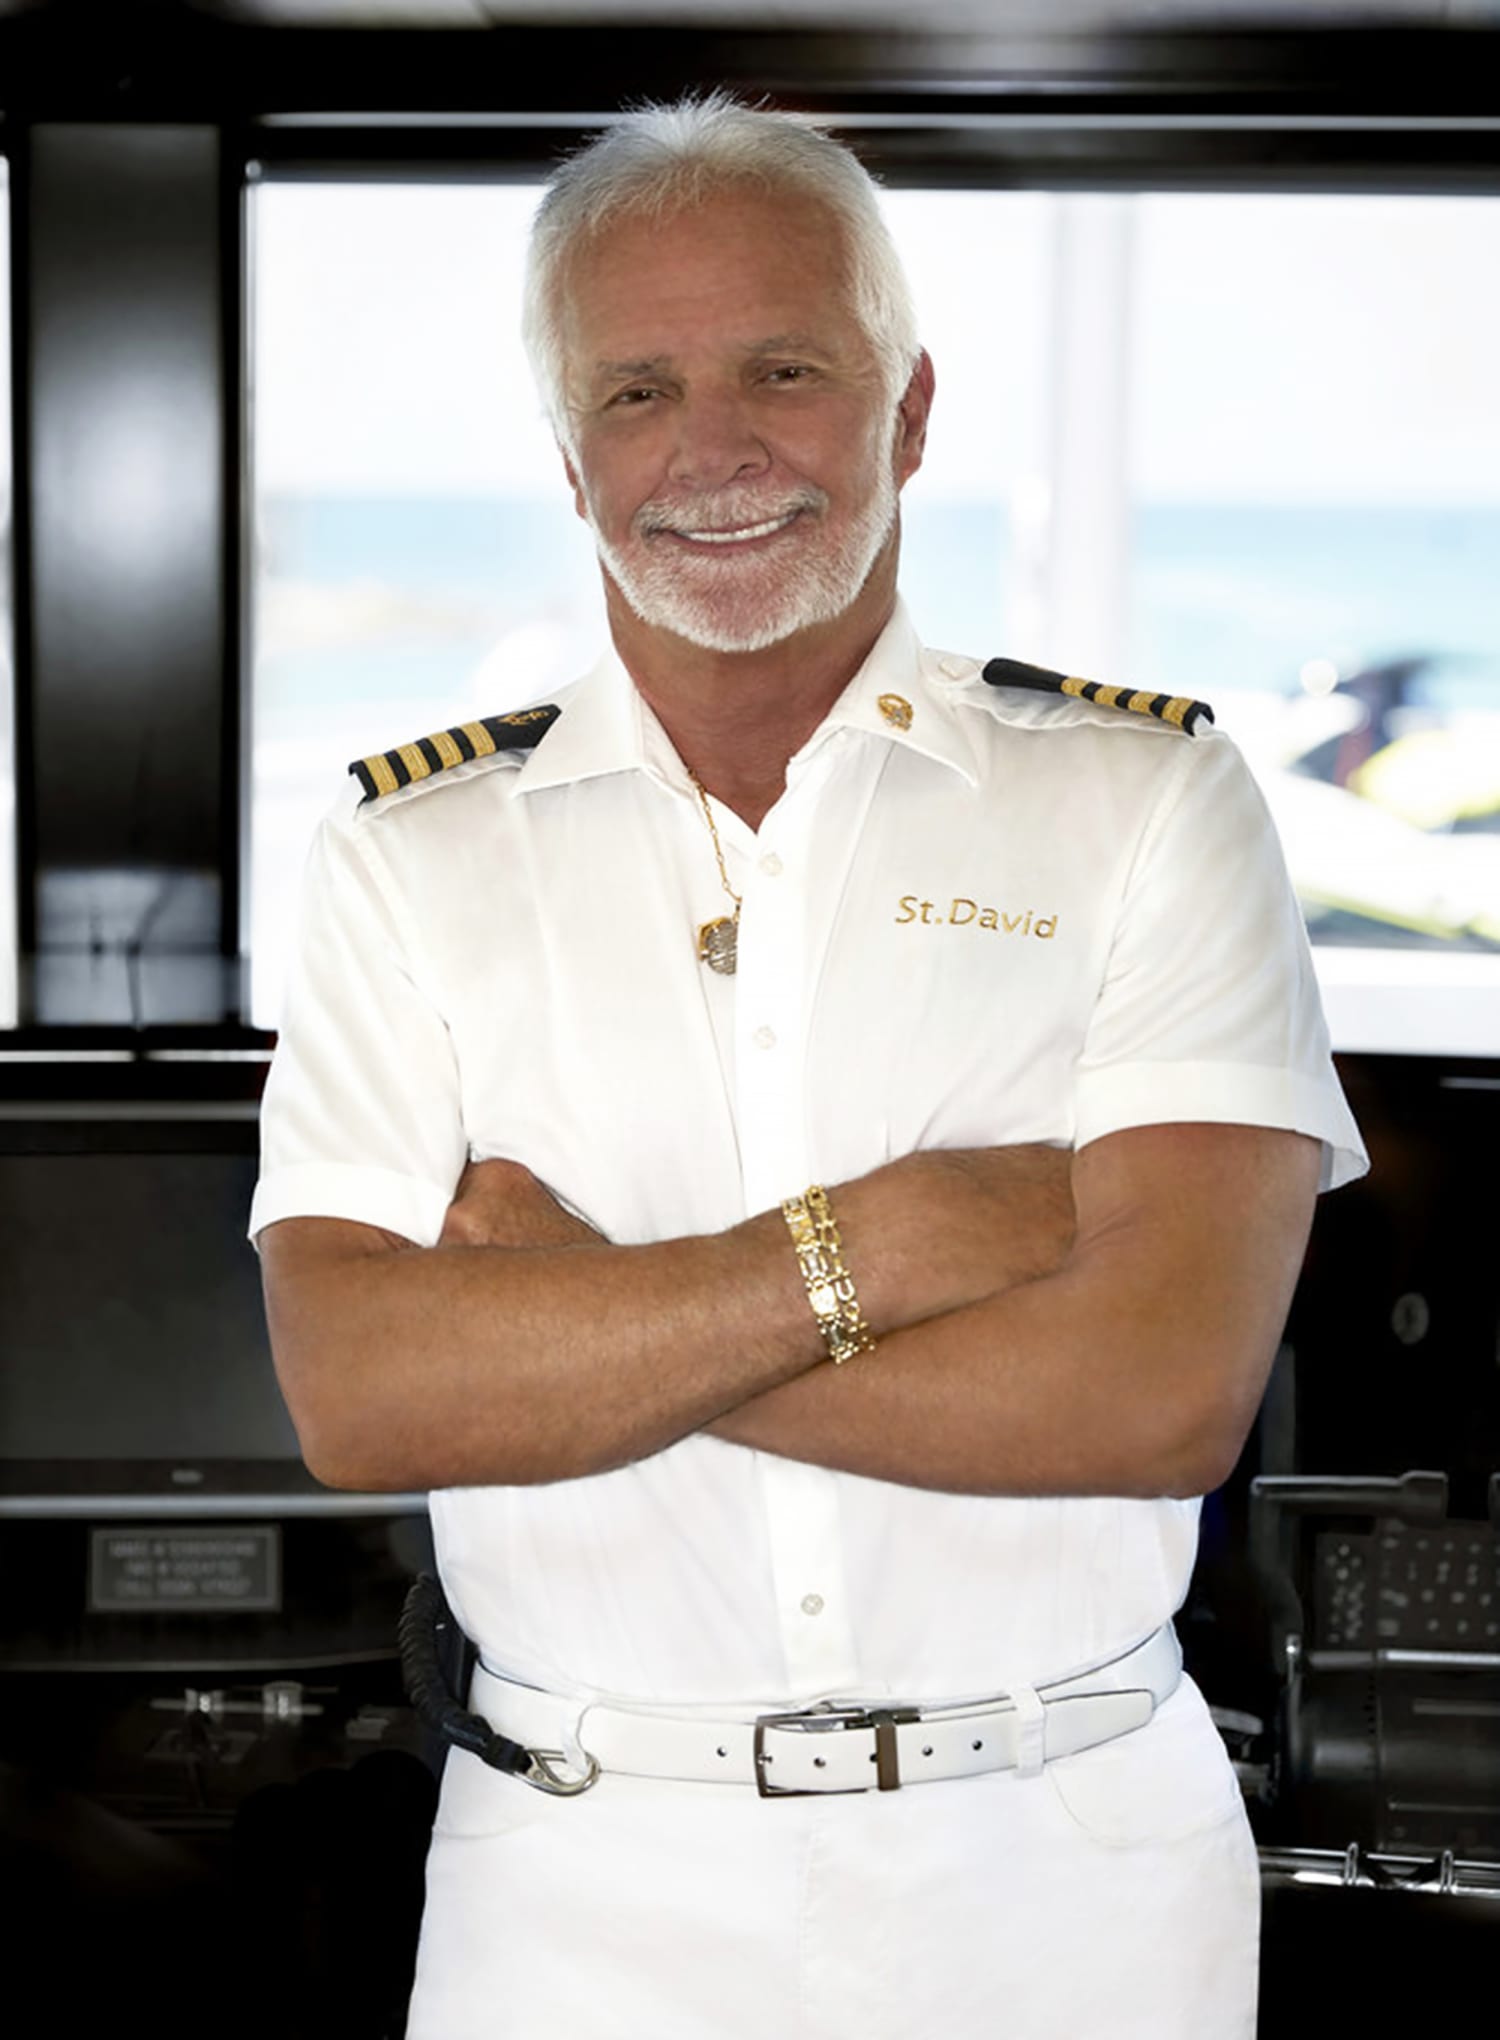 Captain Lee Exits 'Below Deck' Season Early Amid Health, Nerve Issues